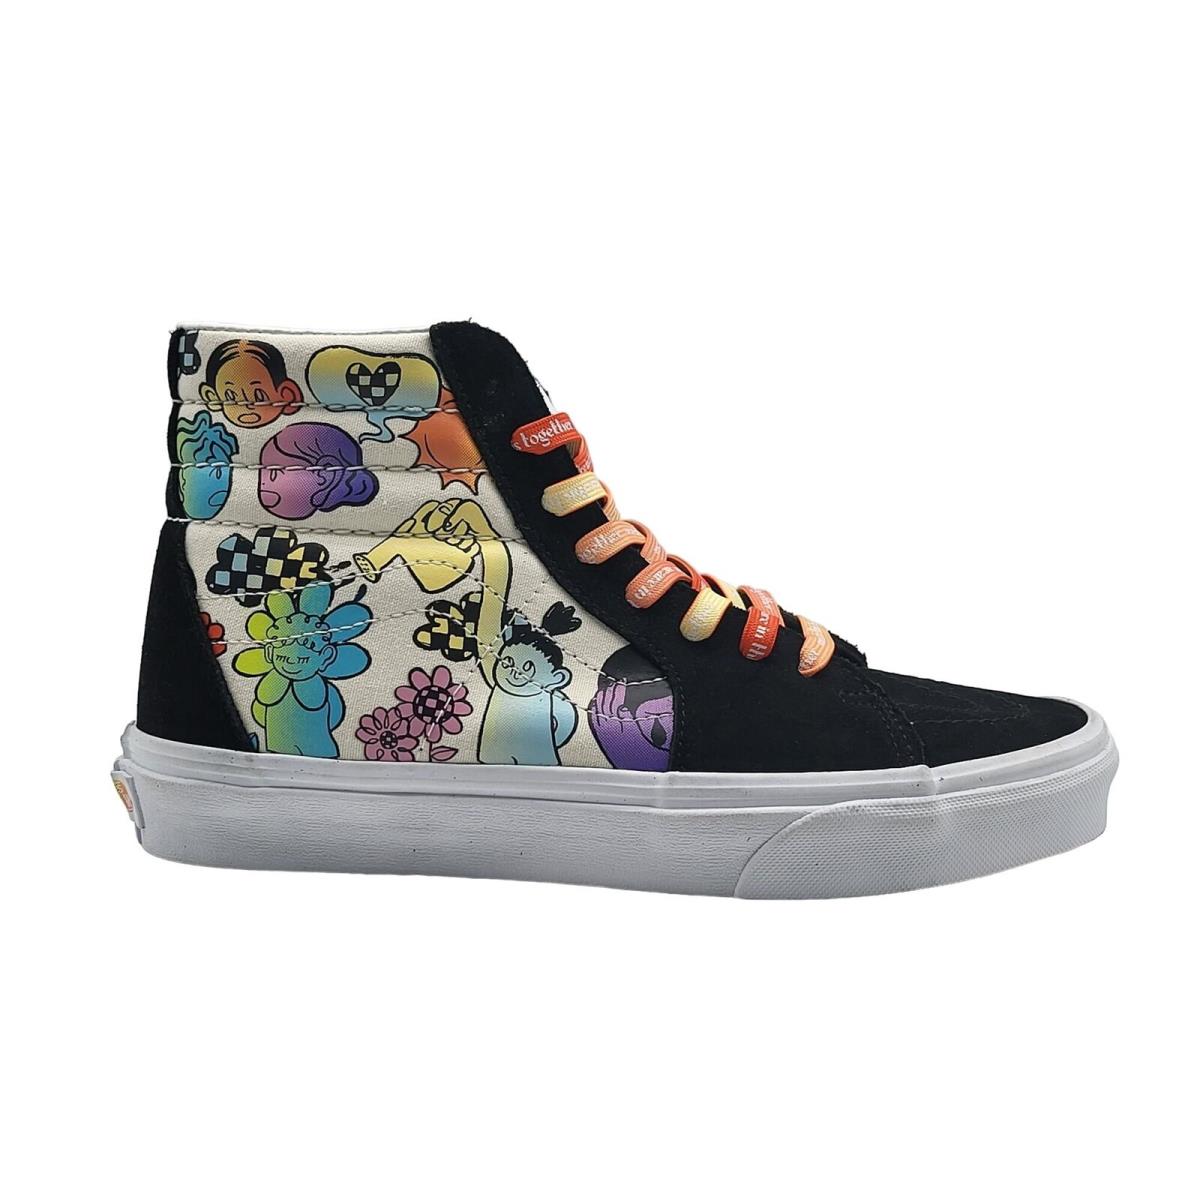 Vans Sk8-Hi Cultivate Care In This Together Shoes Size 6.5 Men 8 Women